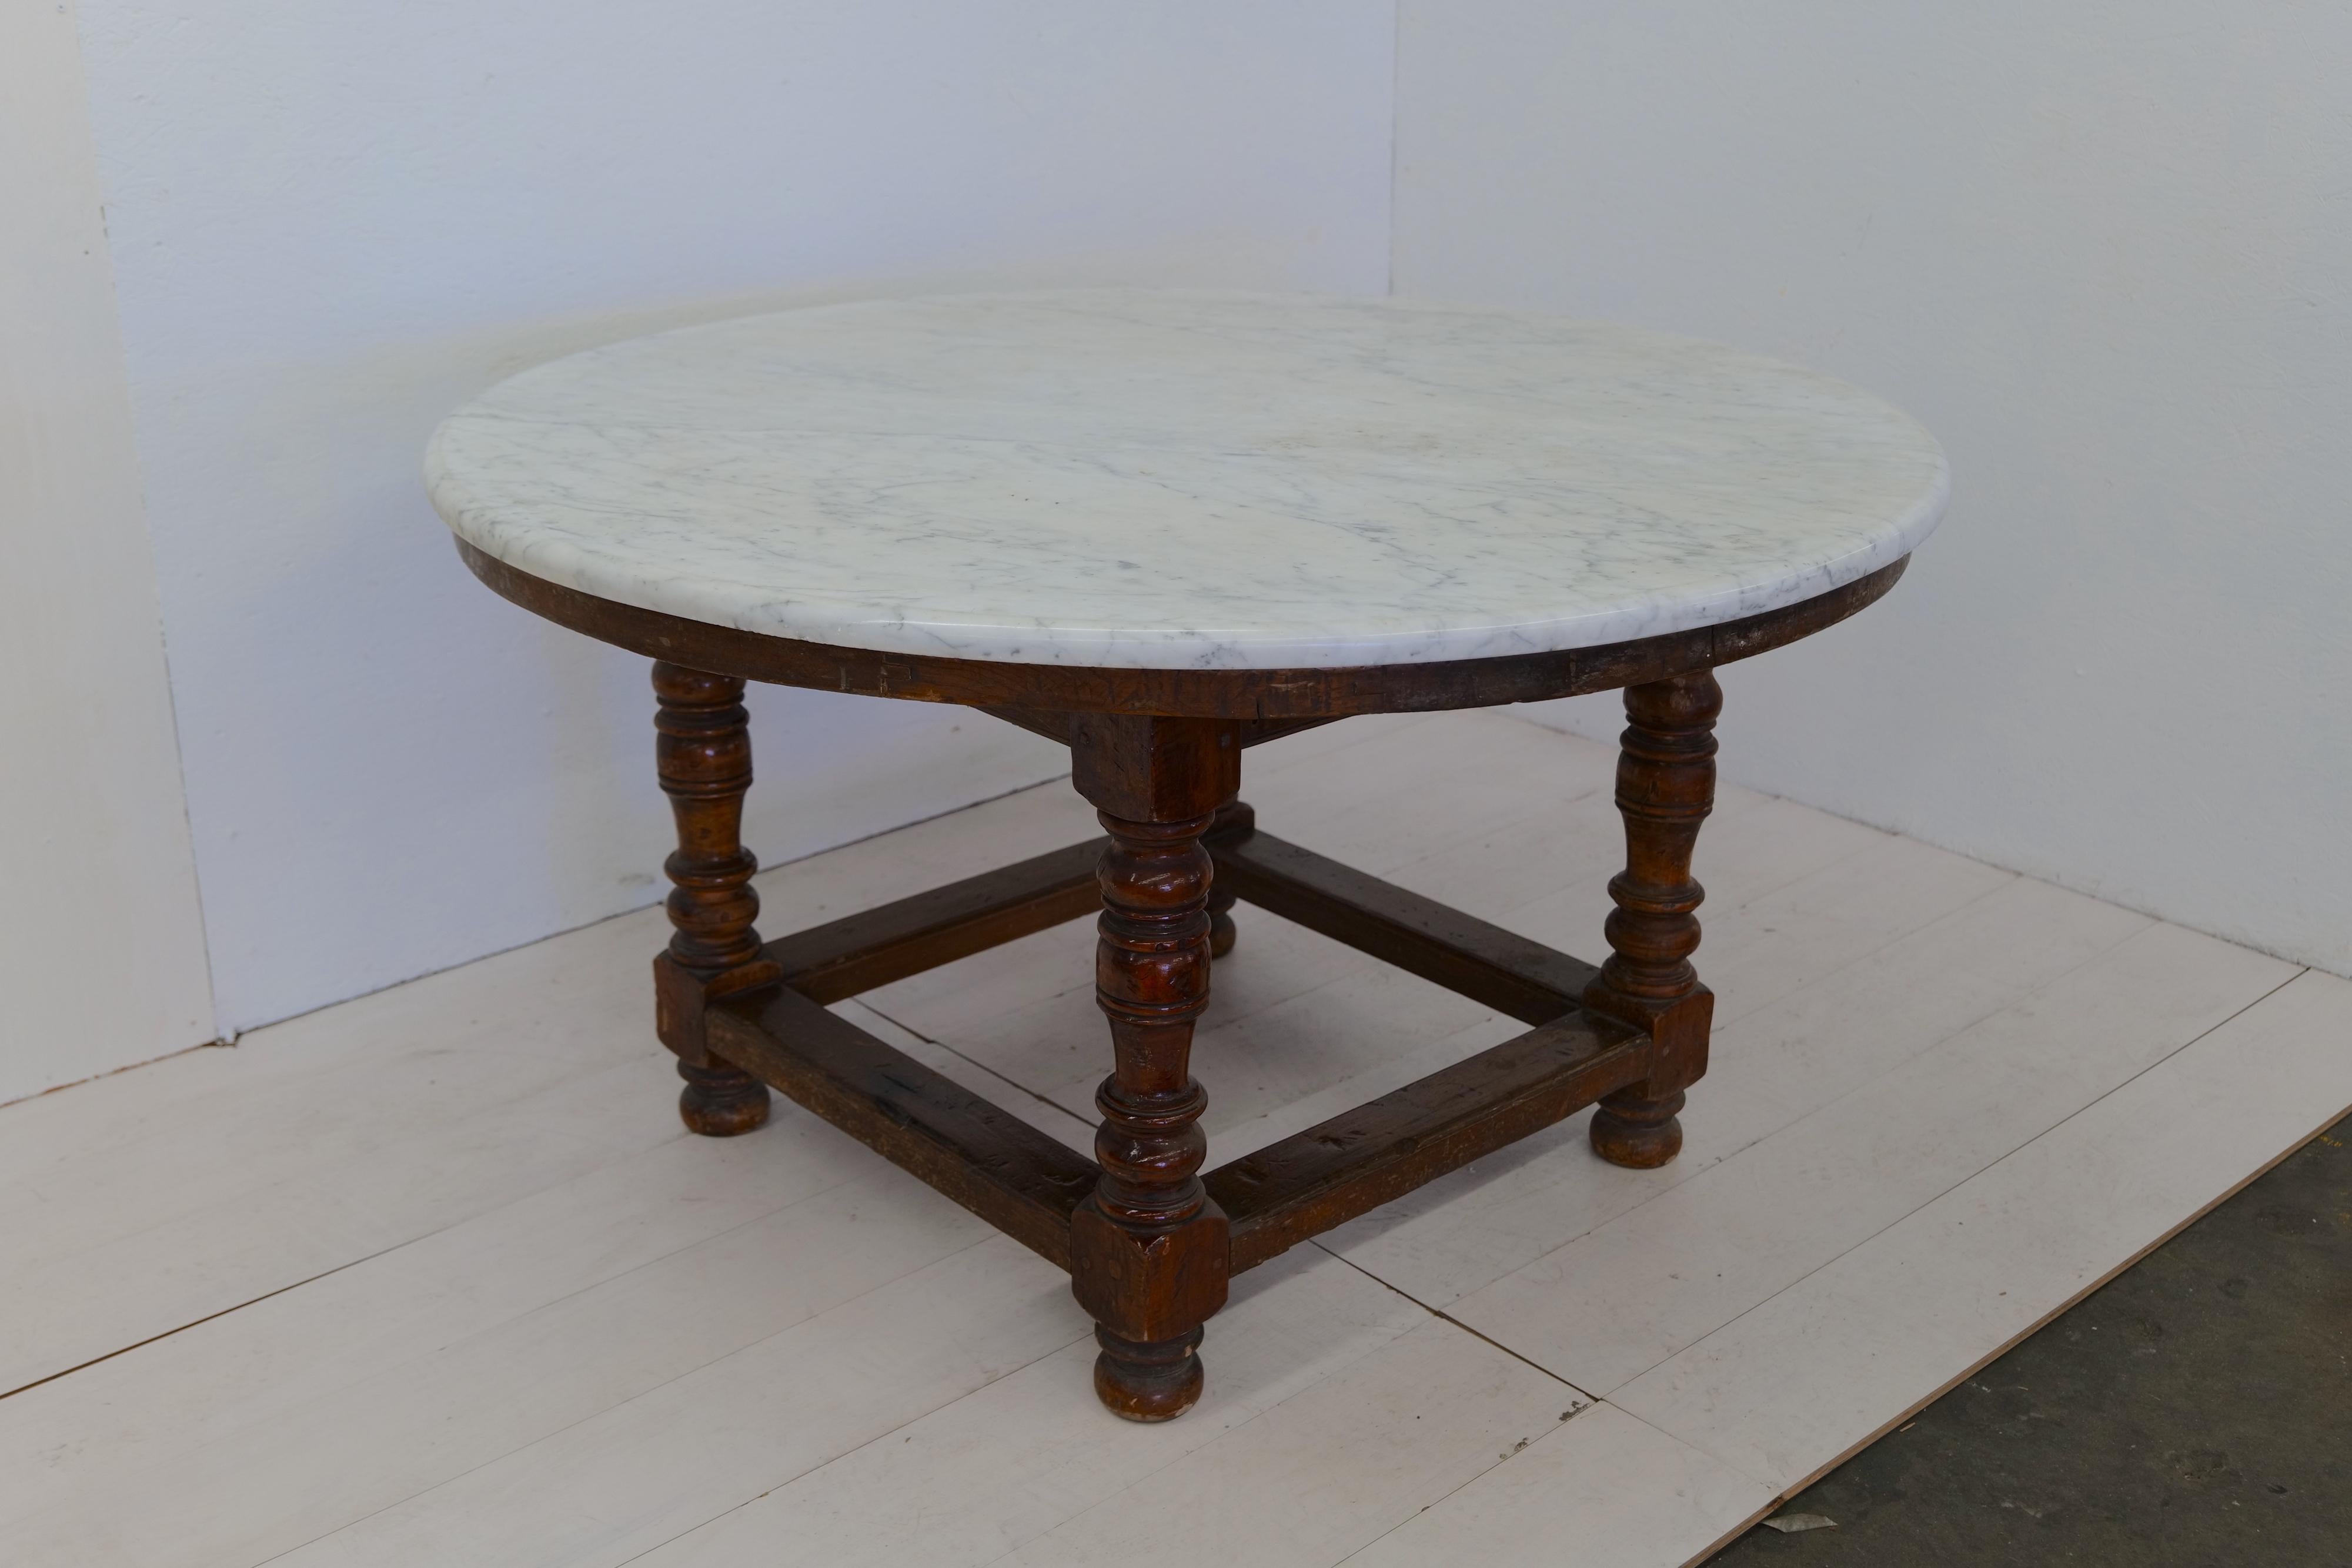 The 18th century Oversize Wood and Marble Dining Table is a grand and luxurious piece of furniture. The table features a sturdy wood base that provides stability and support. The highlight of this dining table is its impressive 1-inch thick carrara